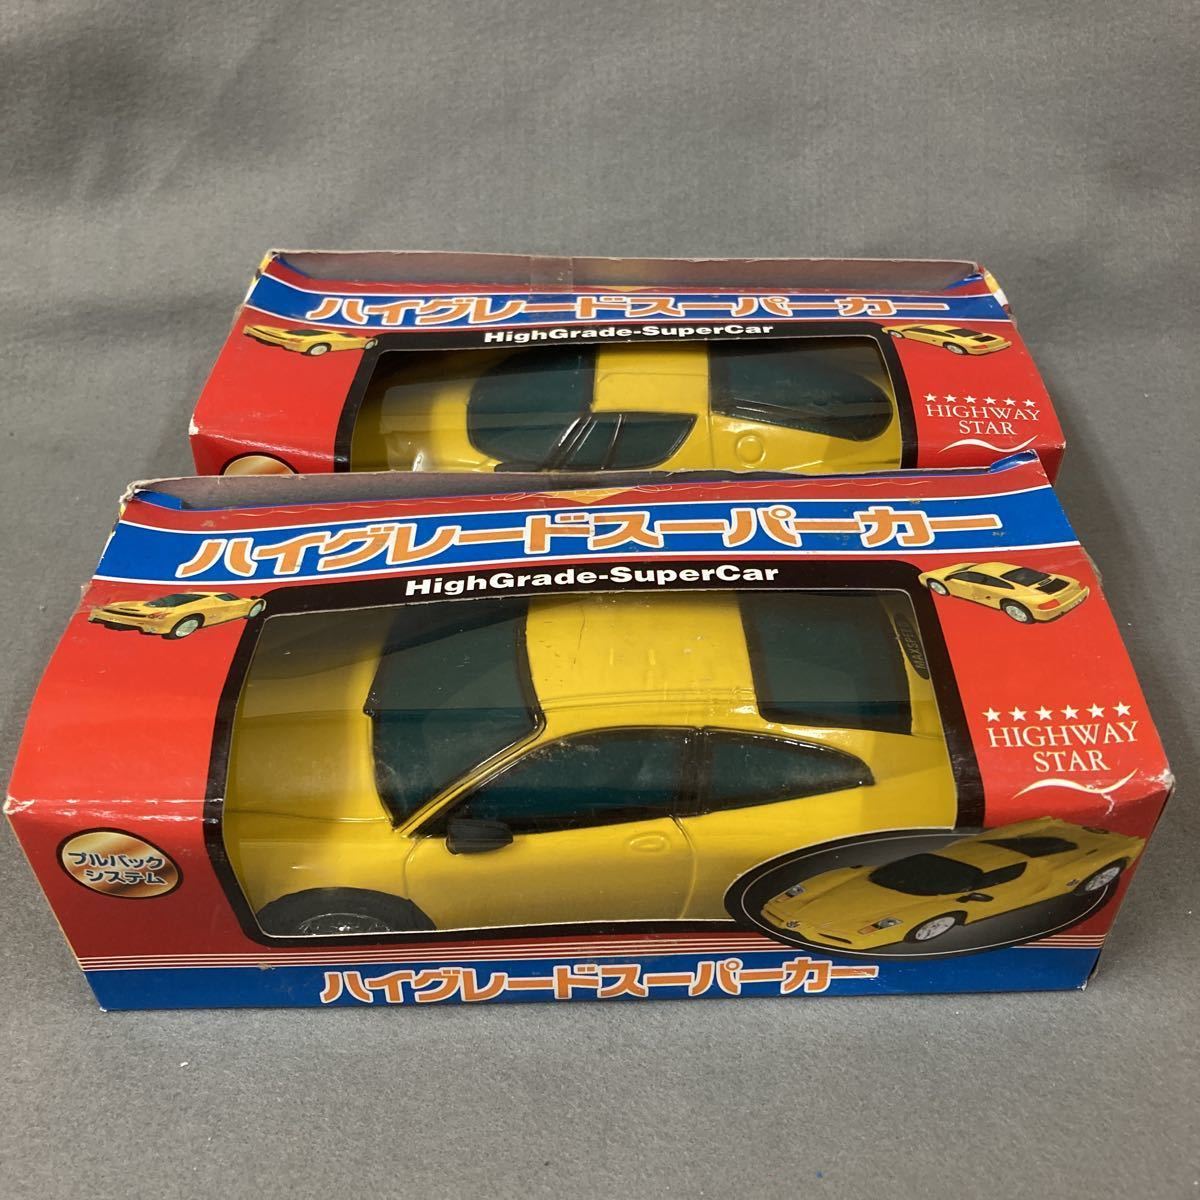  high grade supercar 2 piece pullback system bell toy 